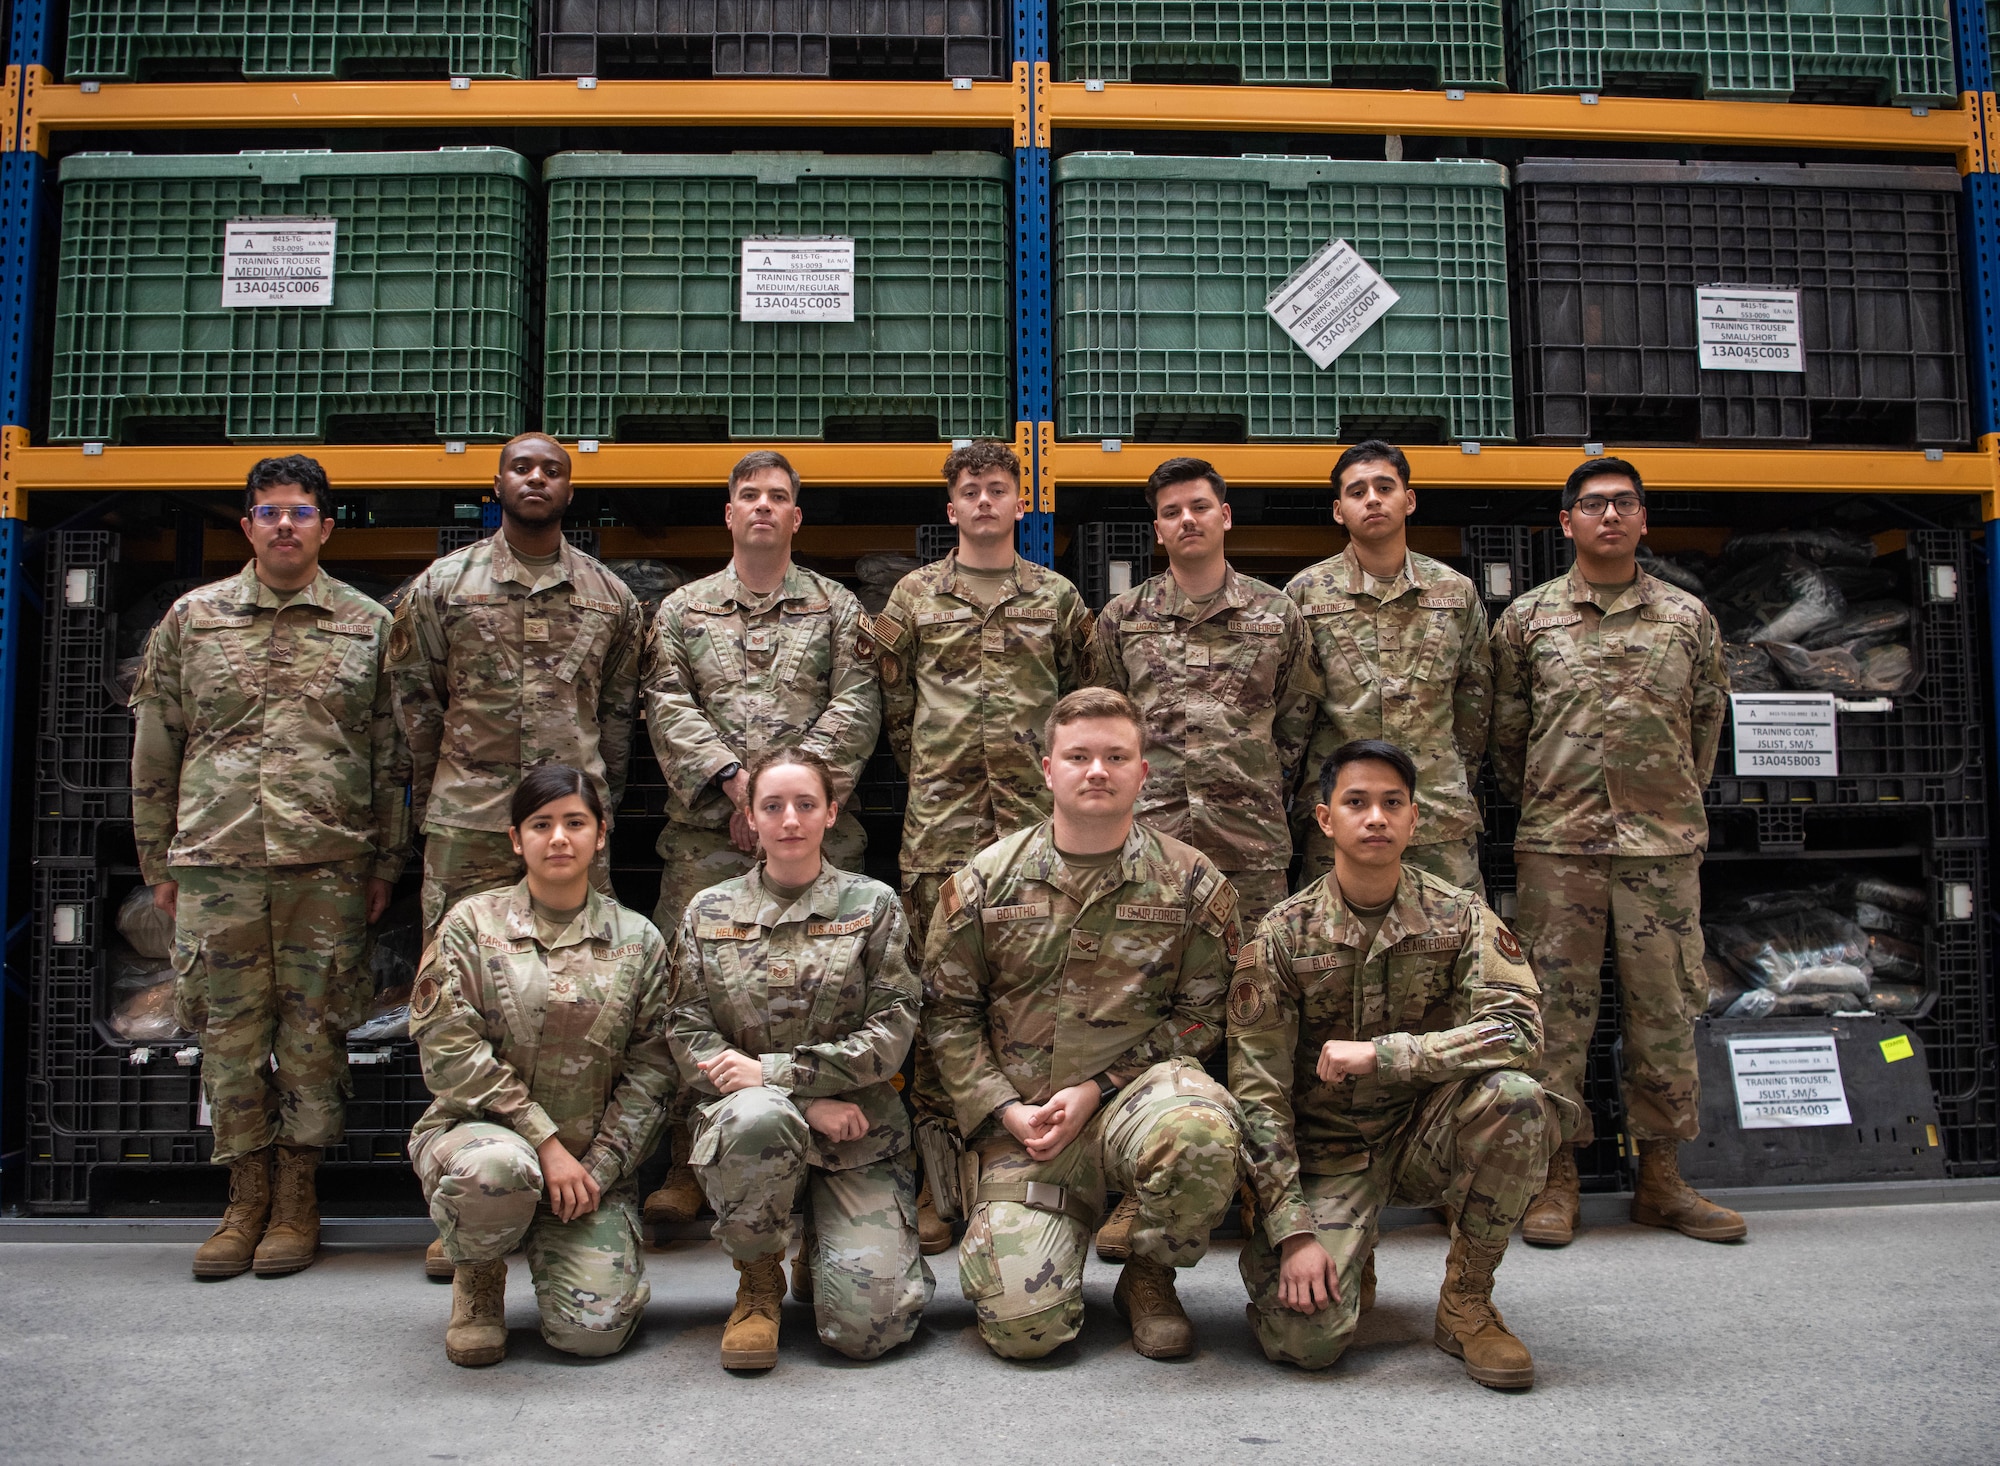 Airman stand for group photo in warehouse.